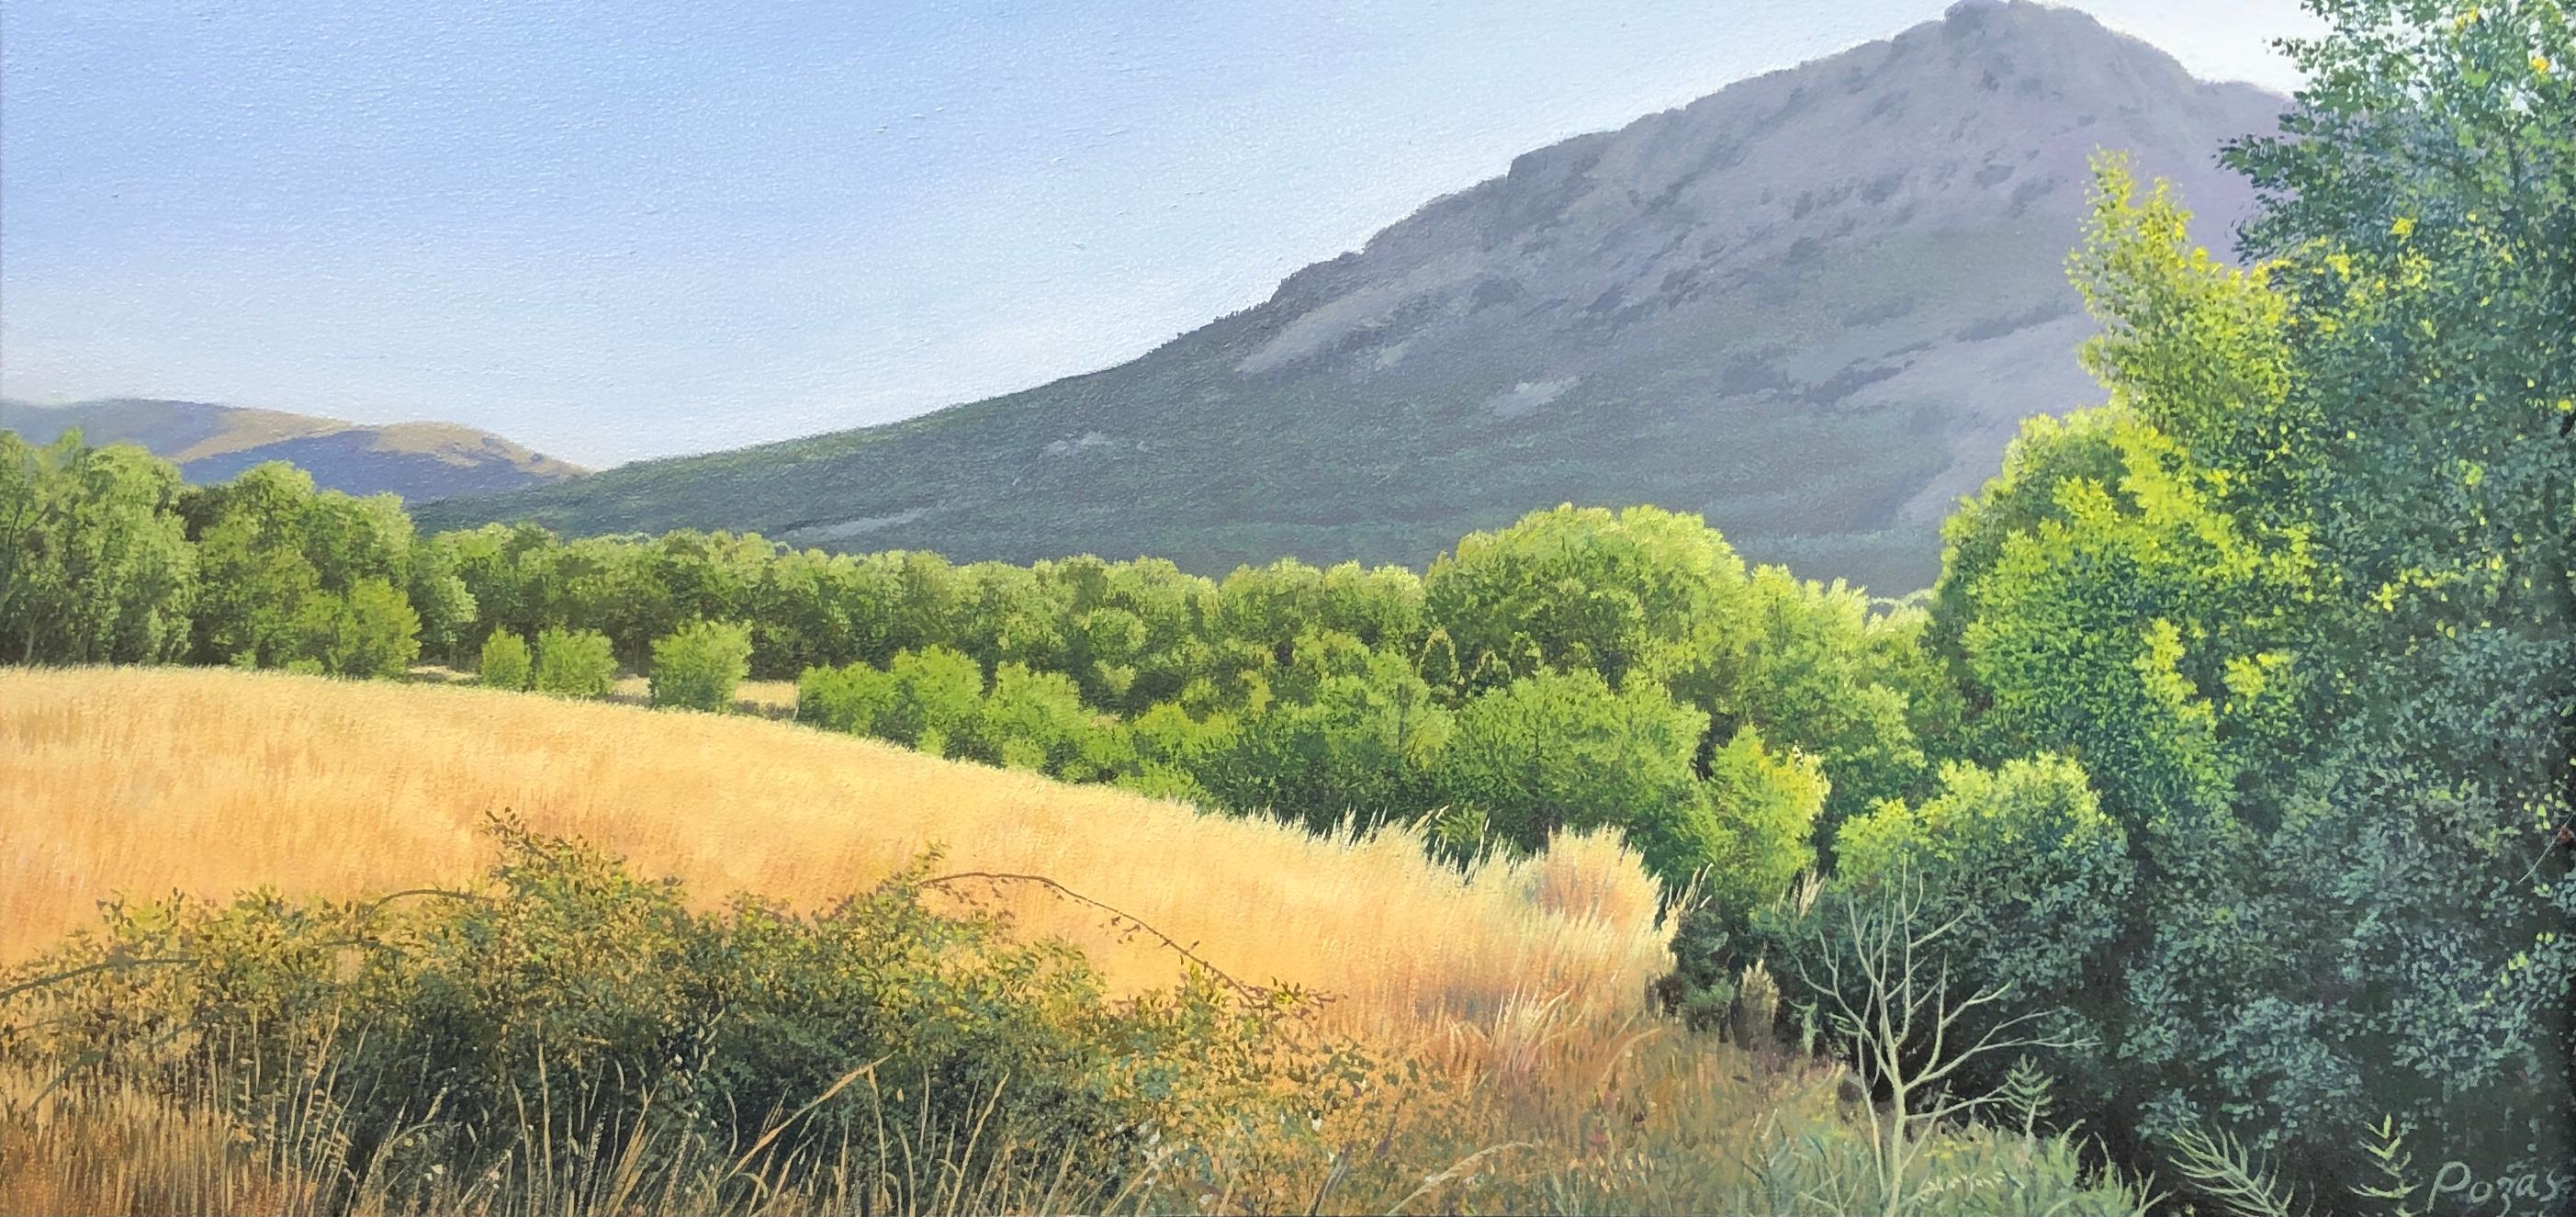 René Monzón Relova “Pozas” Landscape Painting - Awhile, Highly Detailed Lush Landscape with Golden Field and Mountain, Framed